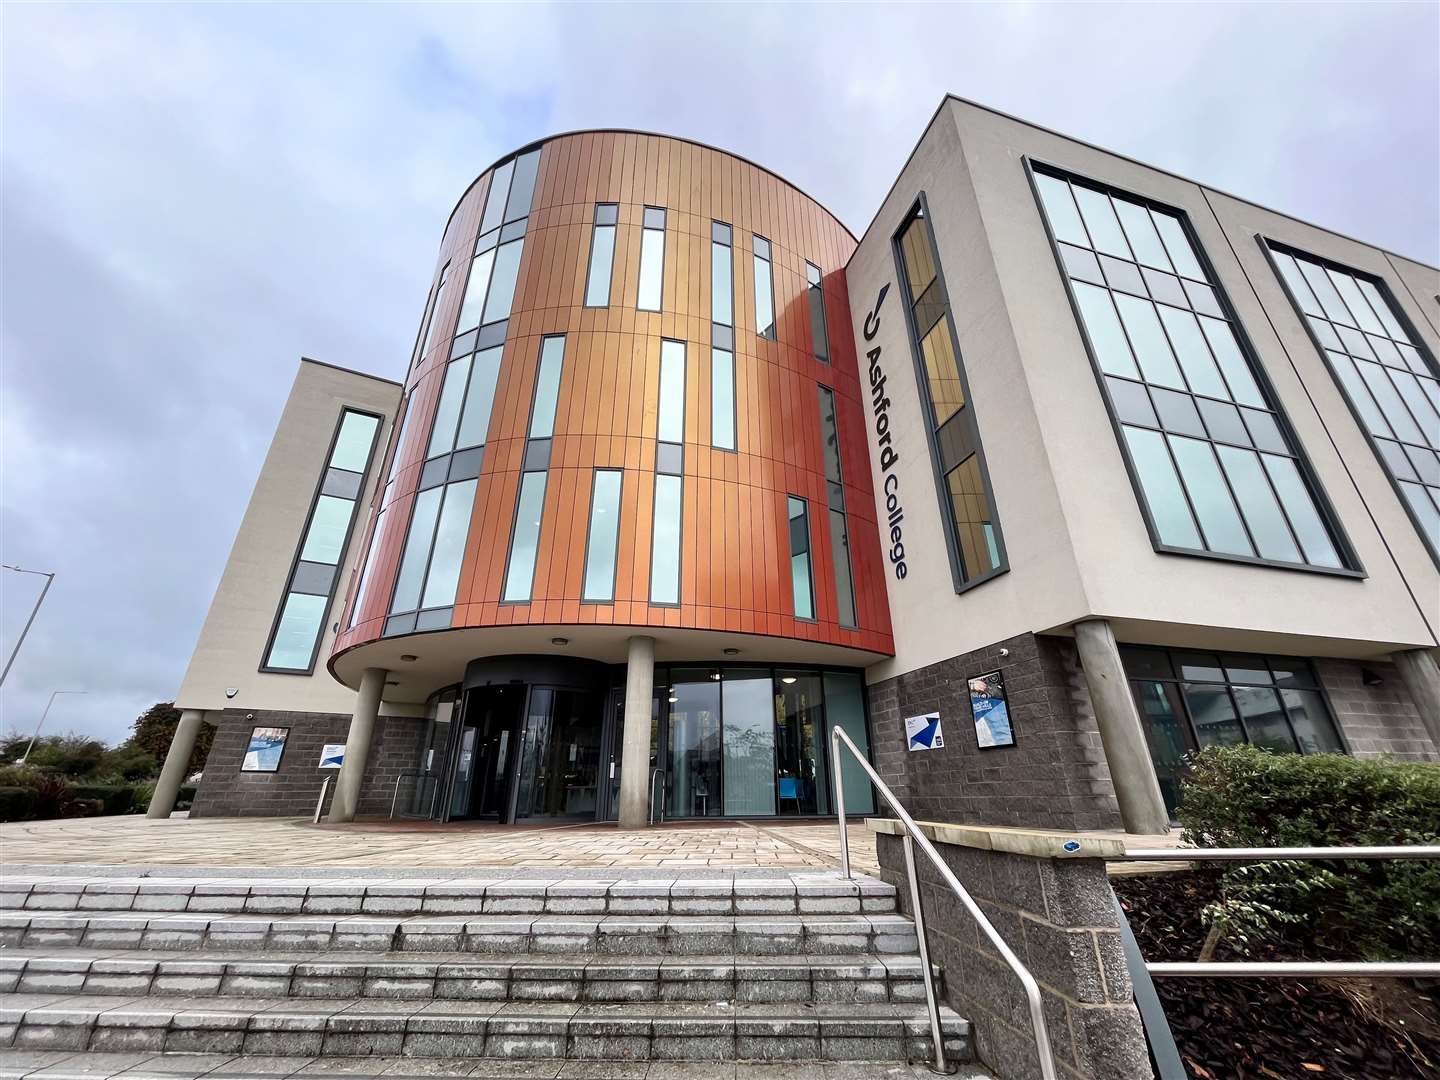 Ashford College's multi-million-pound extension has opened to students